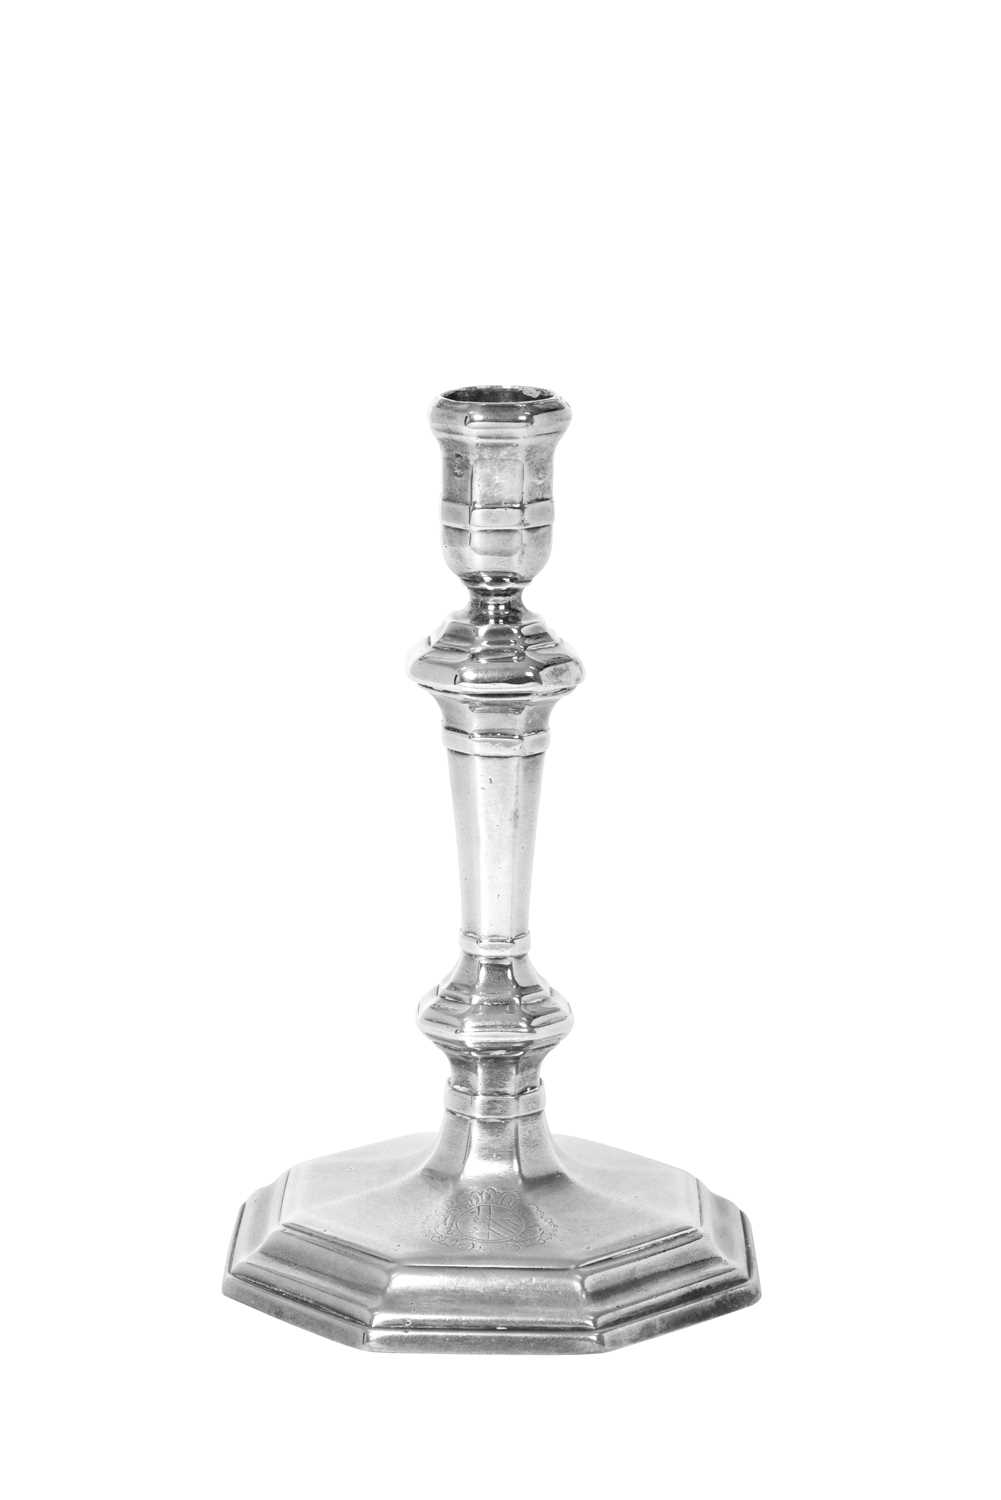 A Pair of Queen Anne Silver Candlesticks, by Simon Pantin, London, 1710 - Image 2 of 10